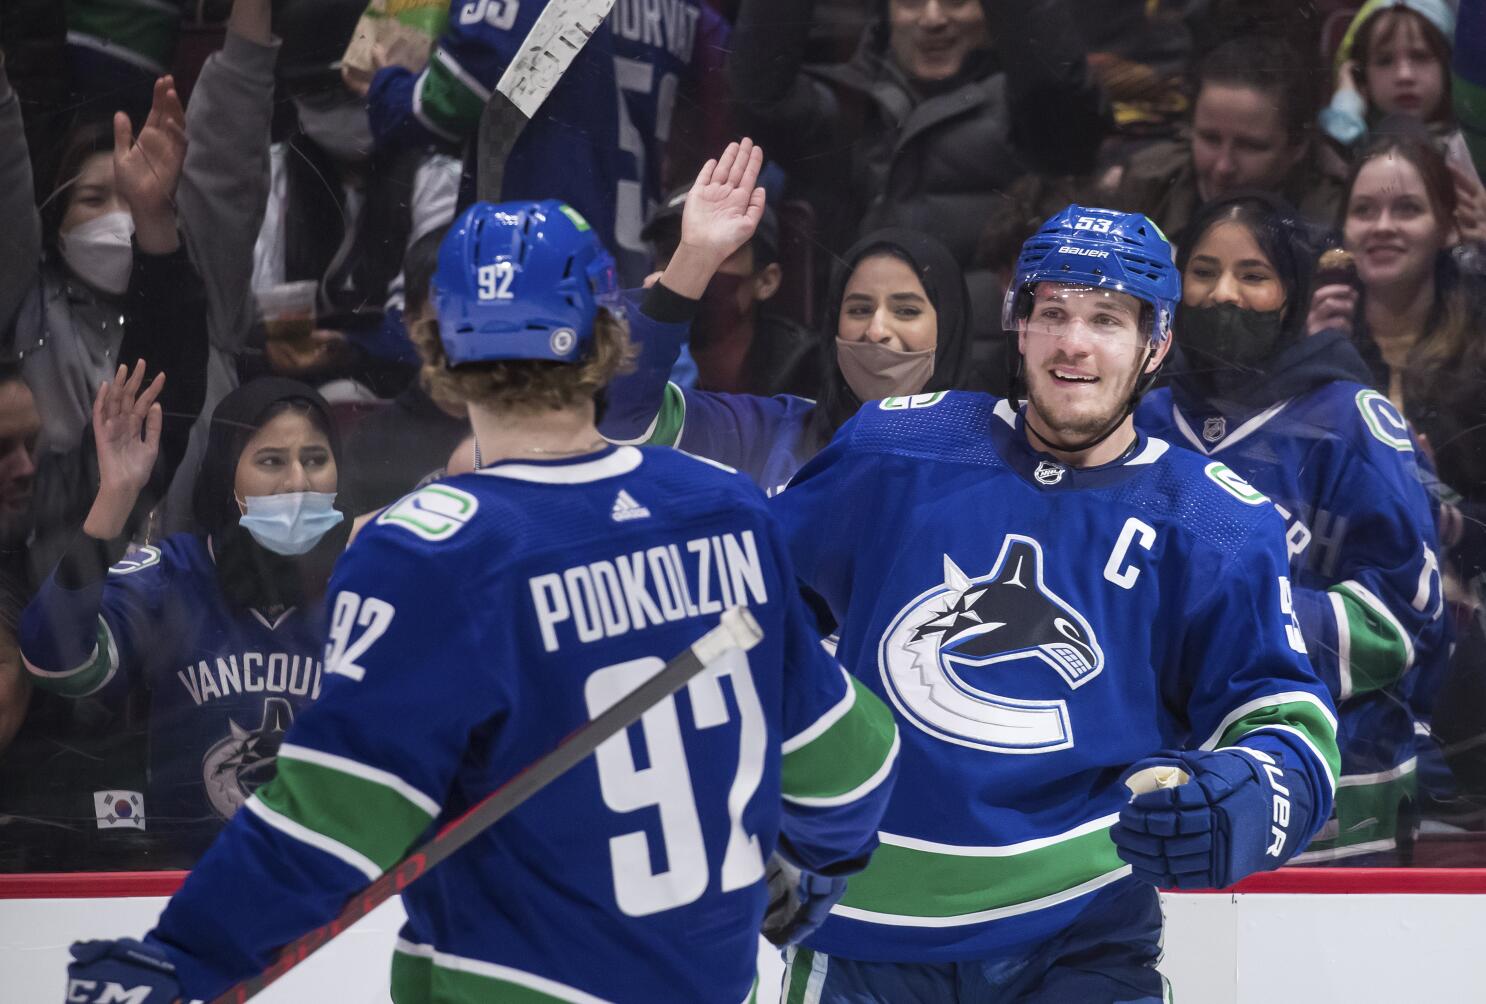 Canucks season preview: Hughes leads way in new role as captain